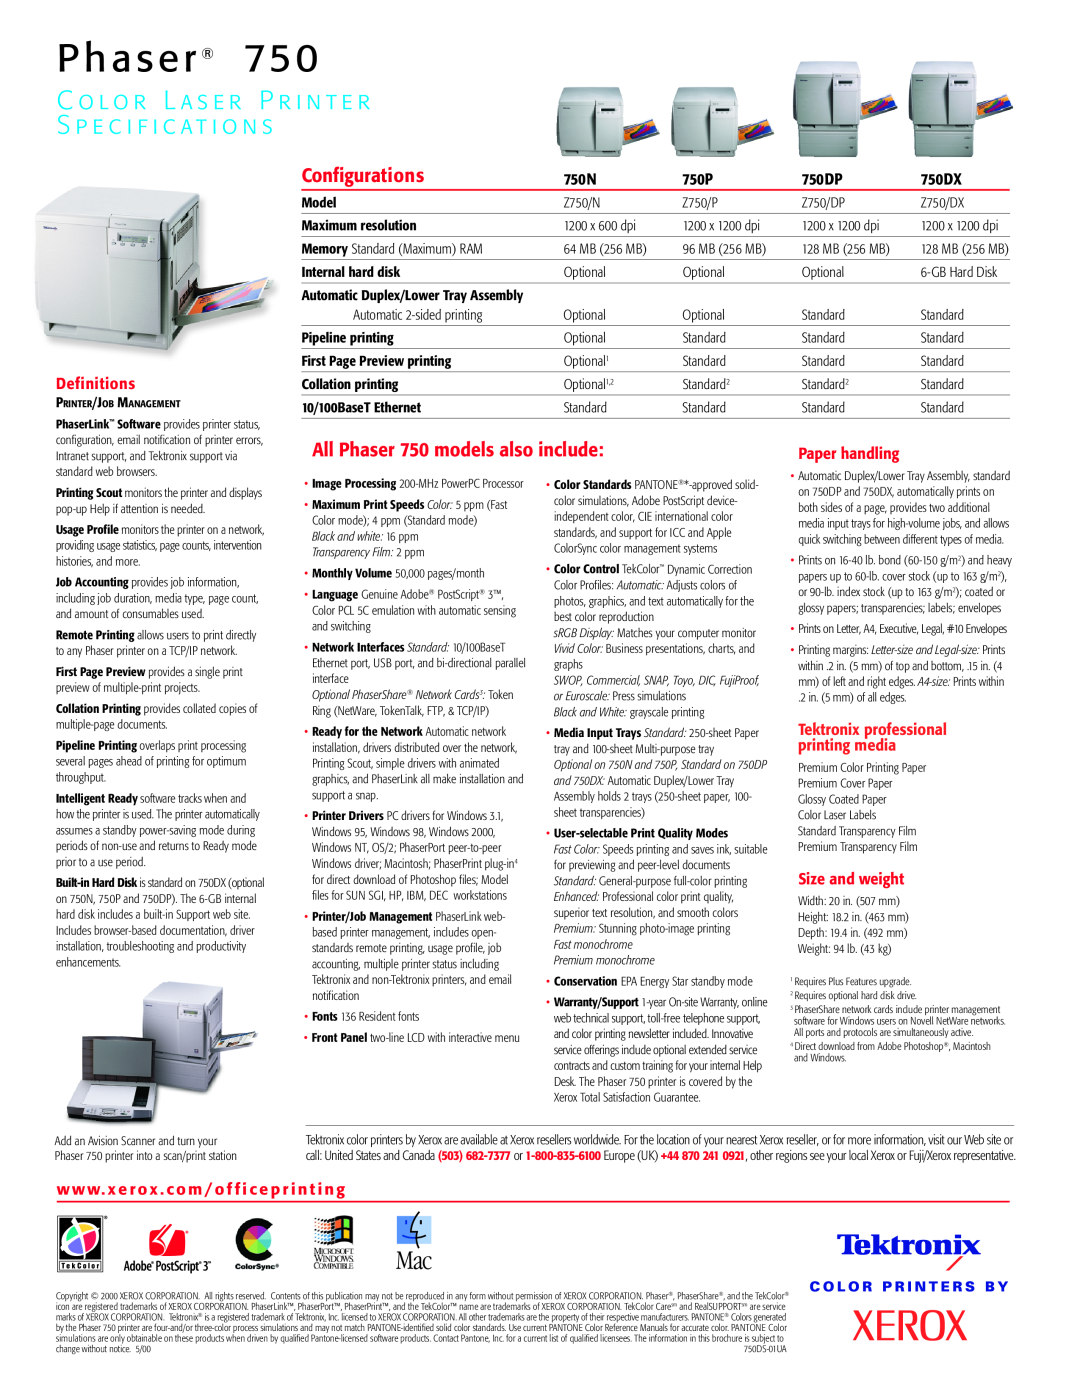 Xerox P h a s e r, Configurations, All Phaser 750 models also include, Definitions, 750N, 750P, 750DP, 750DX 